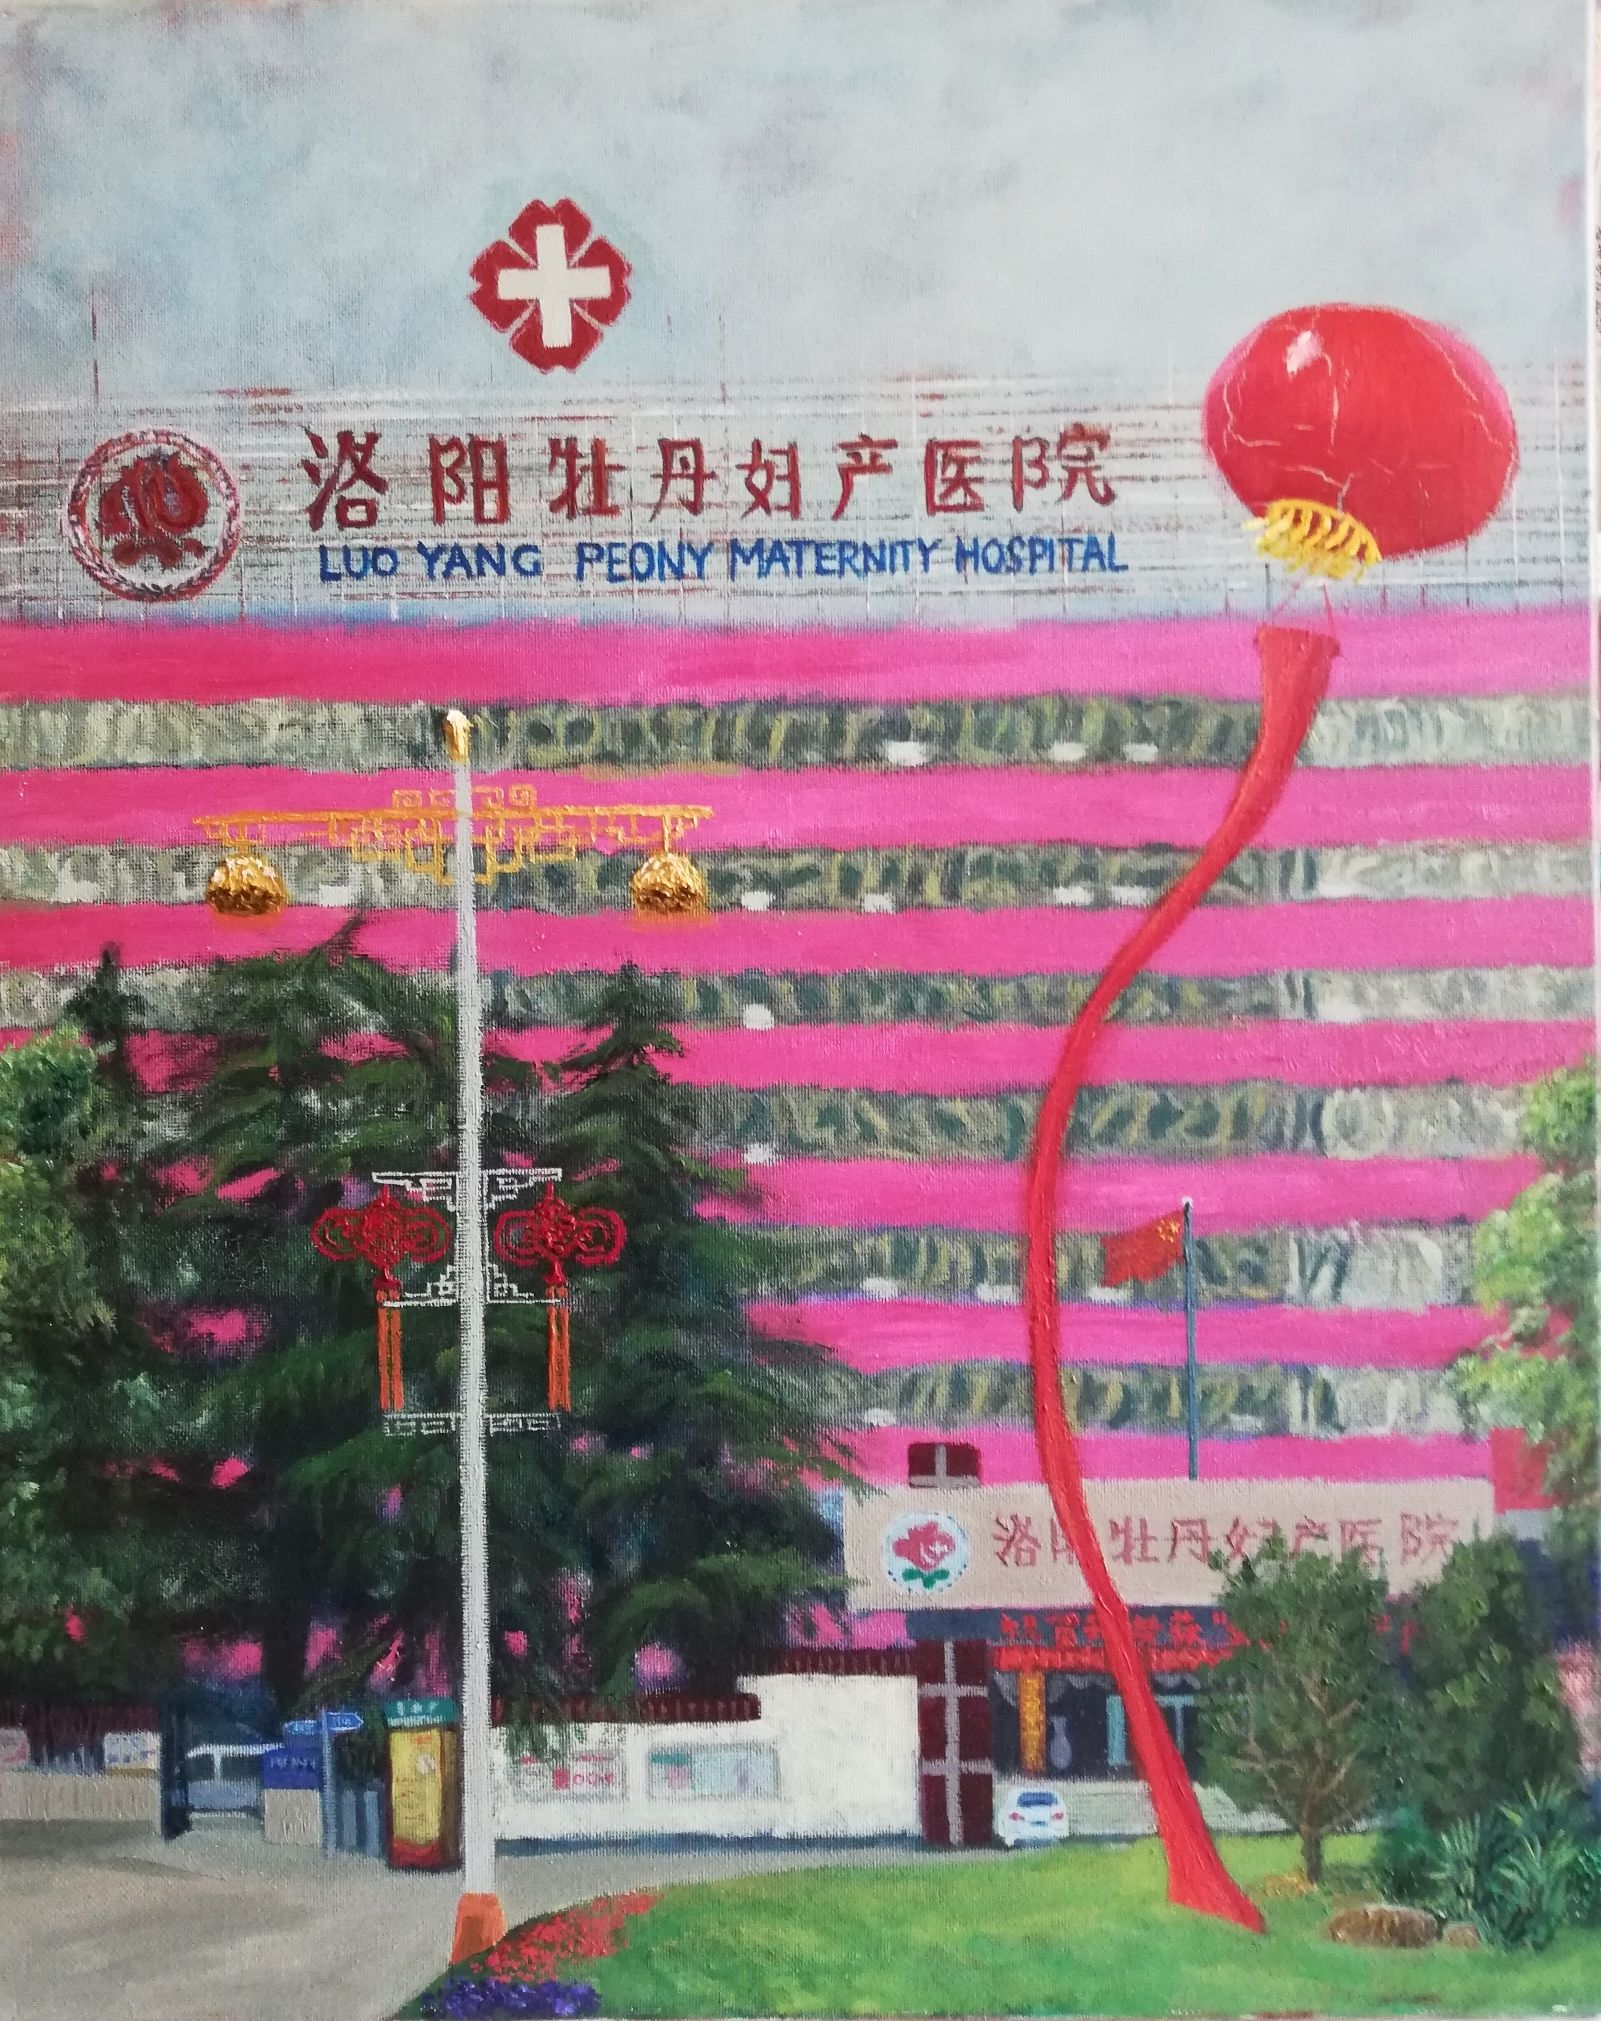 Luoyang Peony Maternity Hospital by day